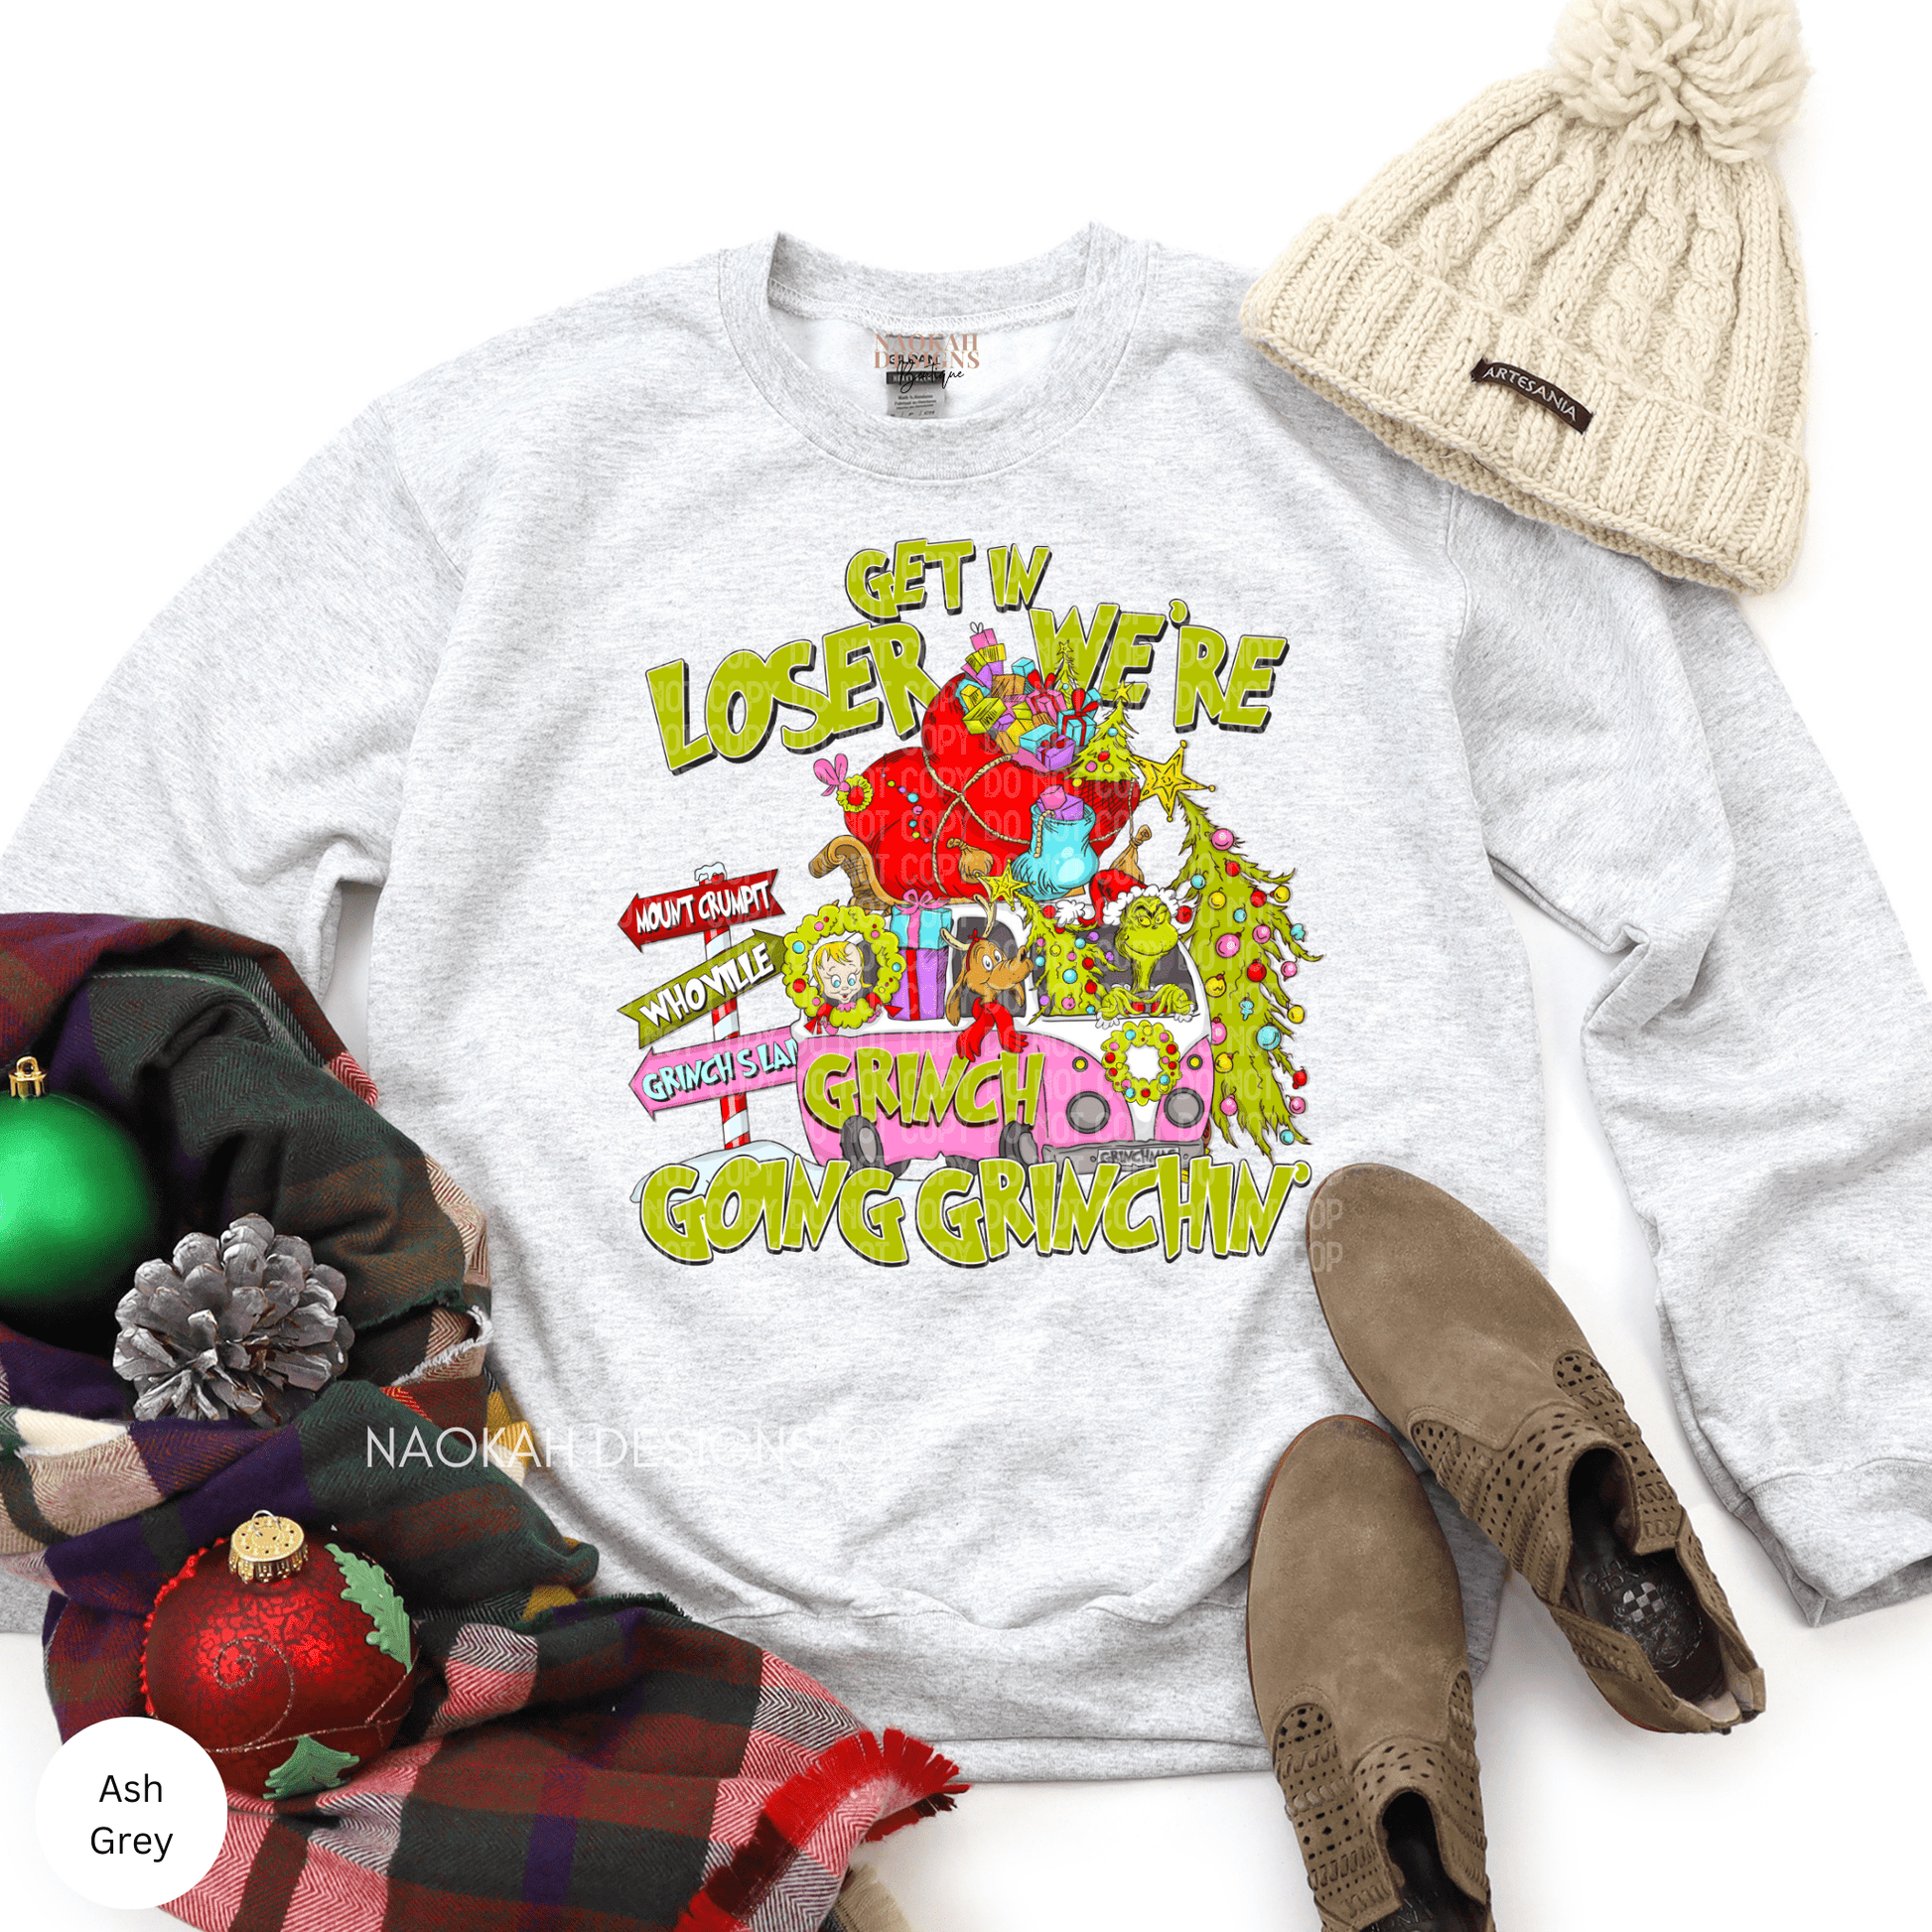 Get In Loser We're Going Grnchin' Sweatshirt, Merry Christmas Sweater, Movie Christmas Characters, Trendy Christmas Lights